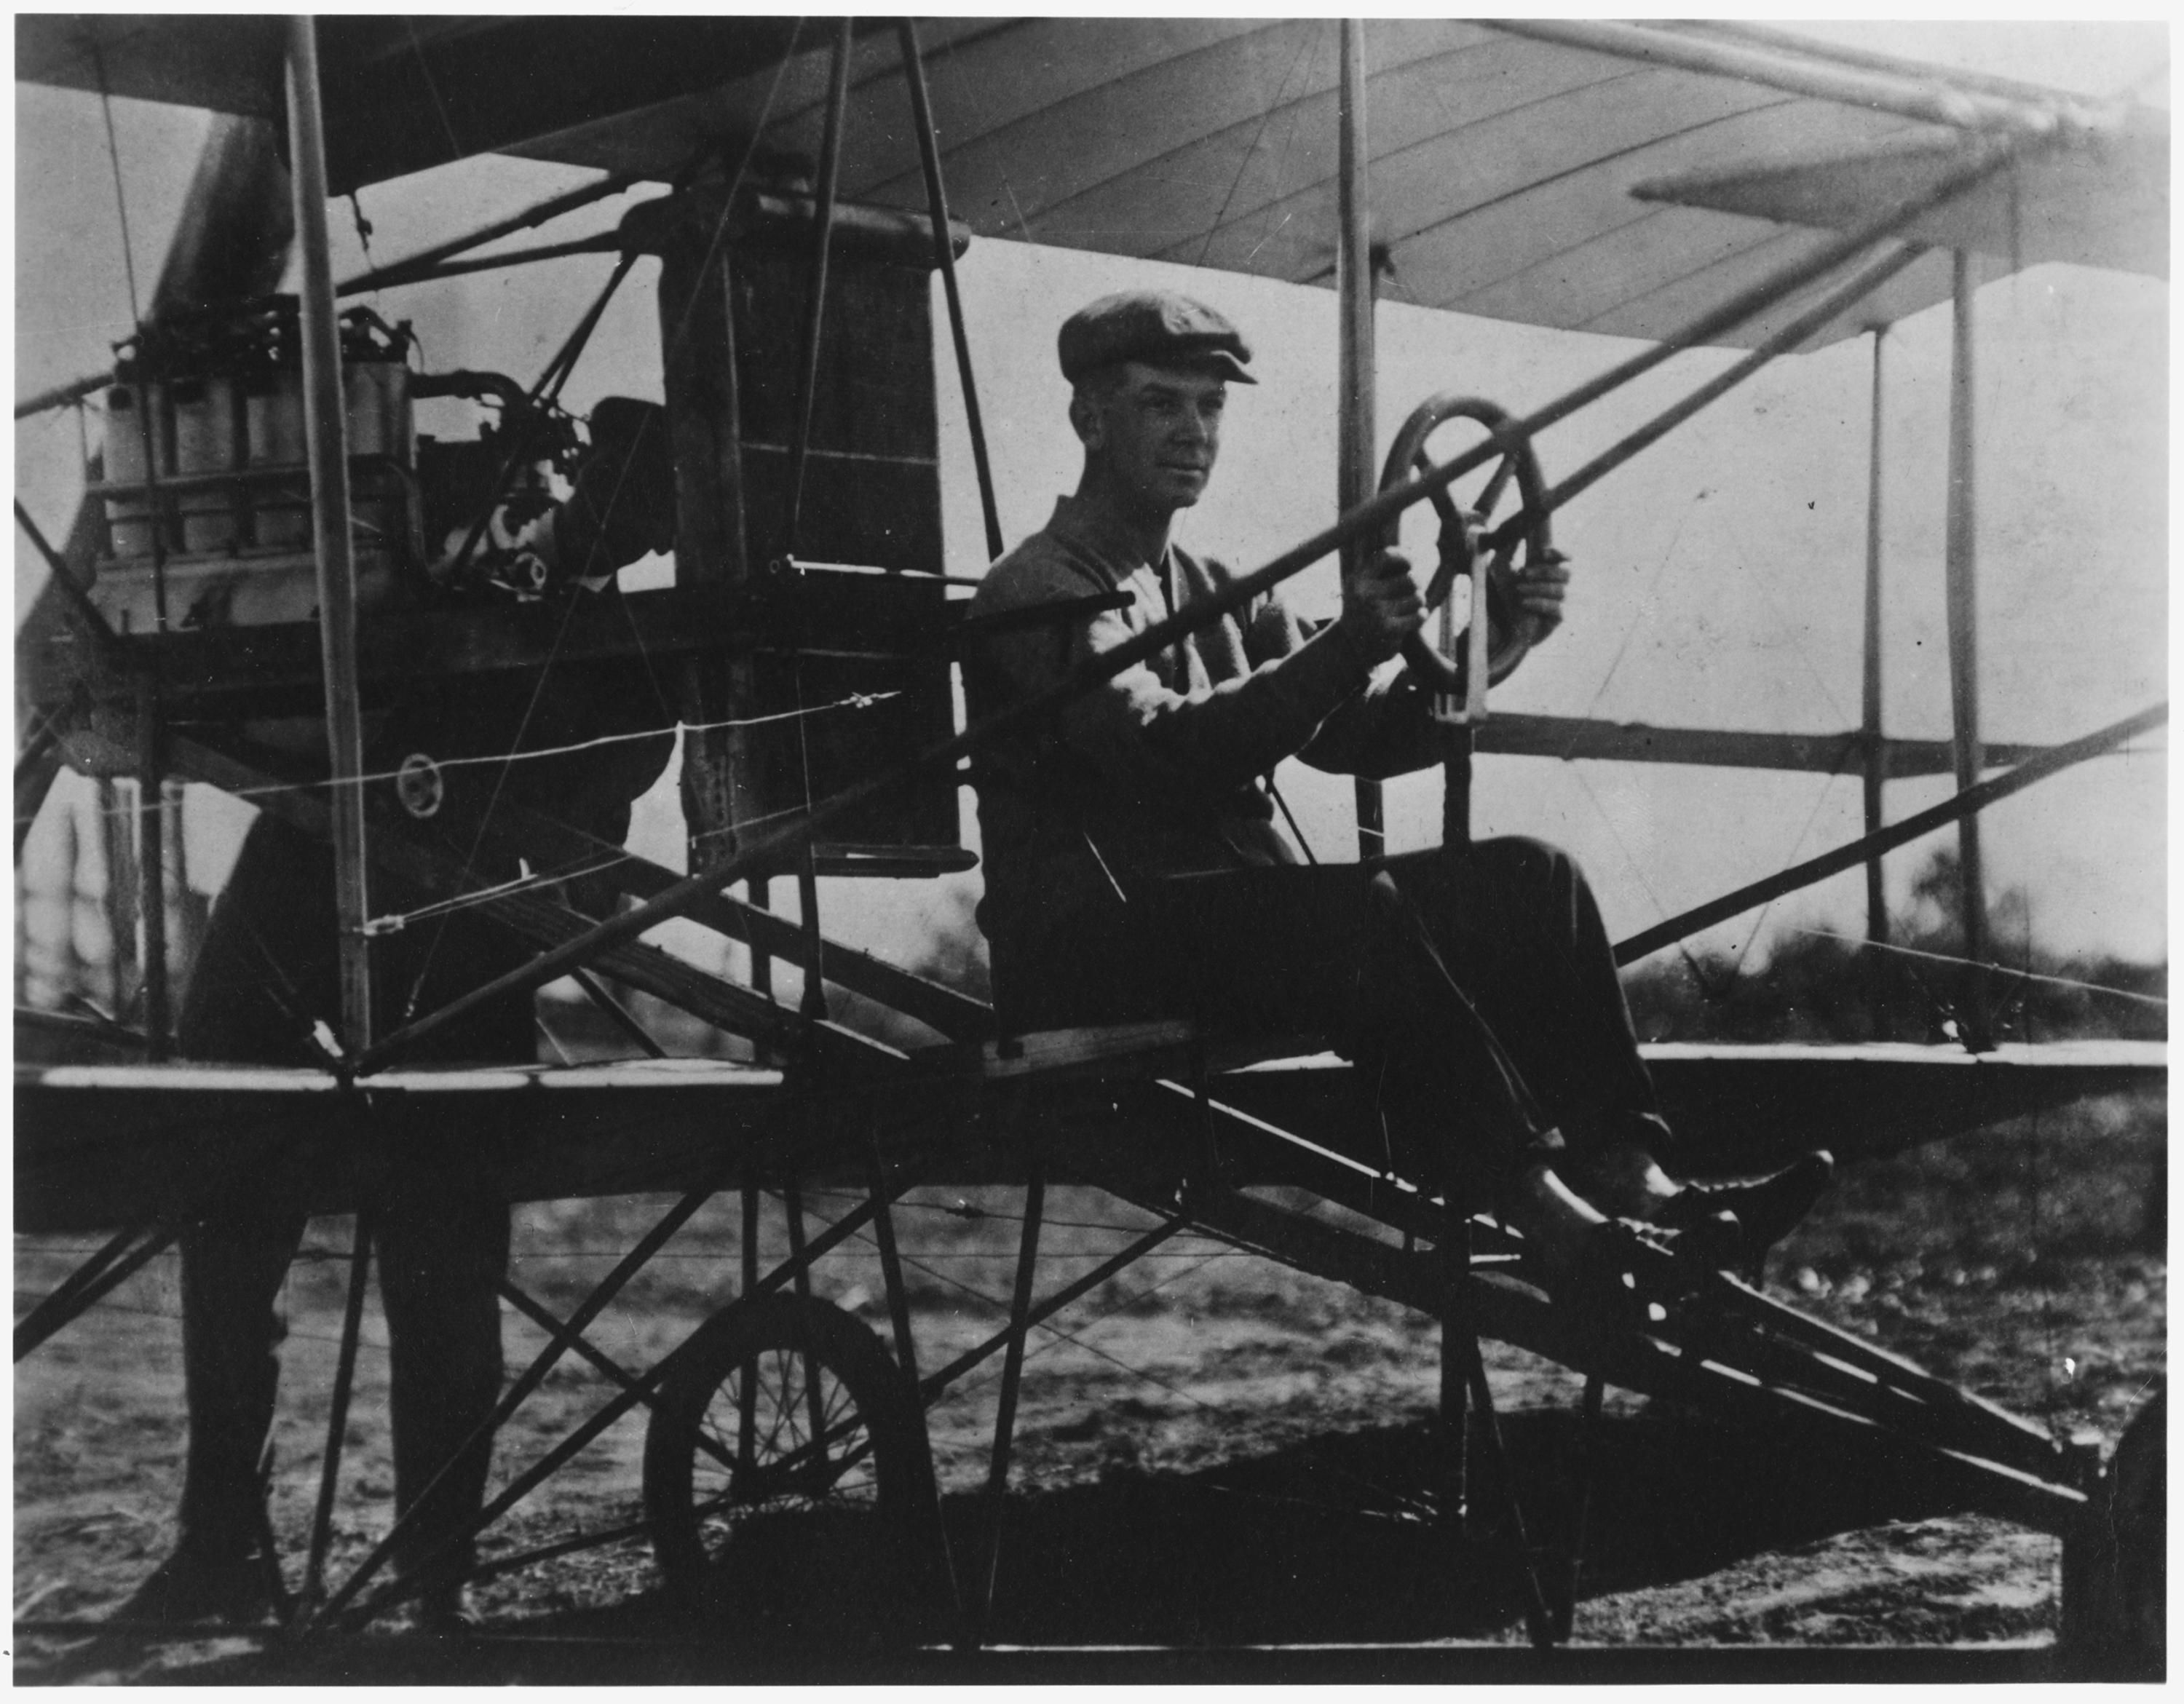 Theodore Ellyson and Glenn Curtiss using an early aircraft.